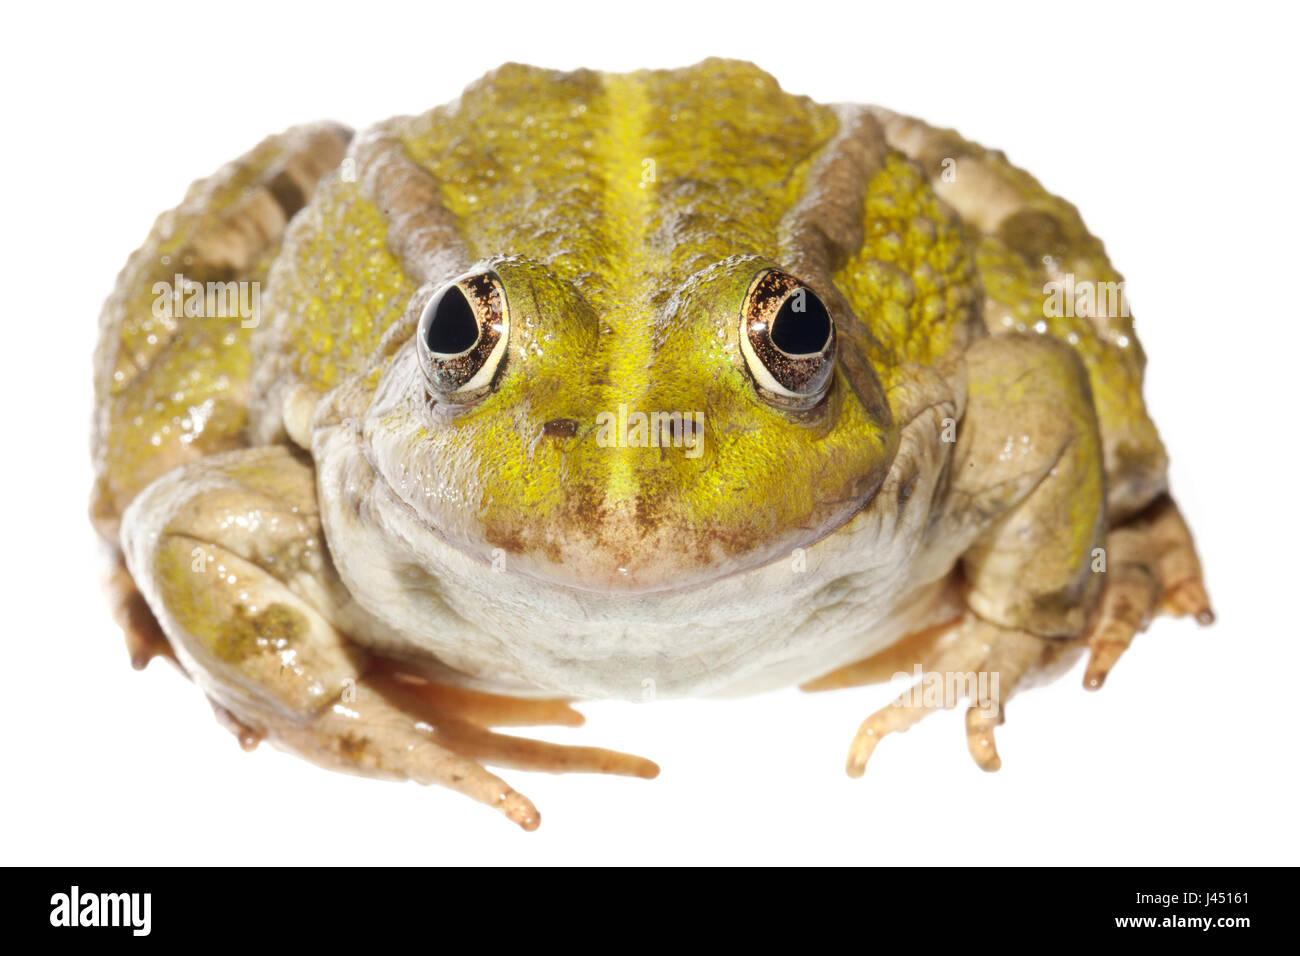 Marsh frog photographed on a white background Stock Photo